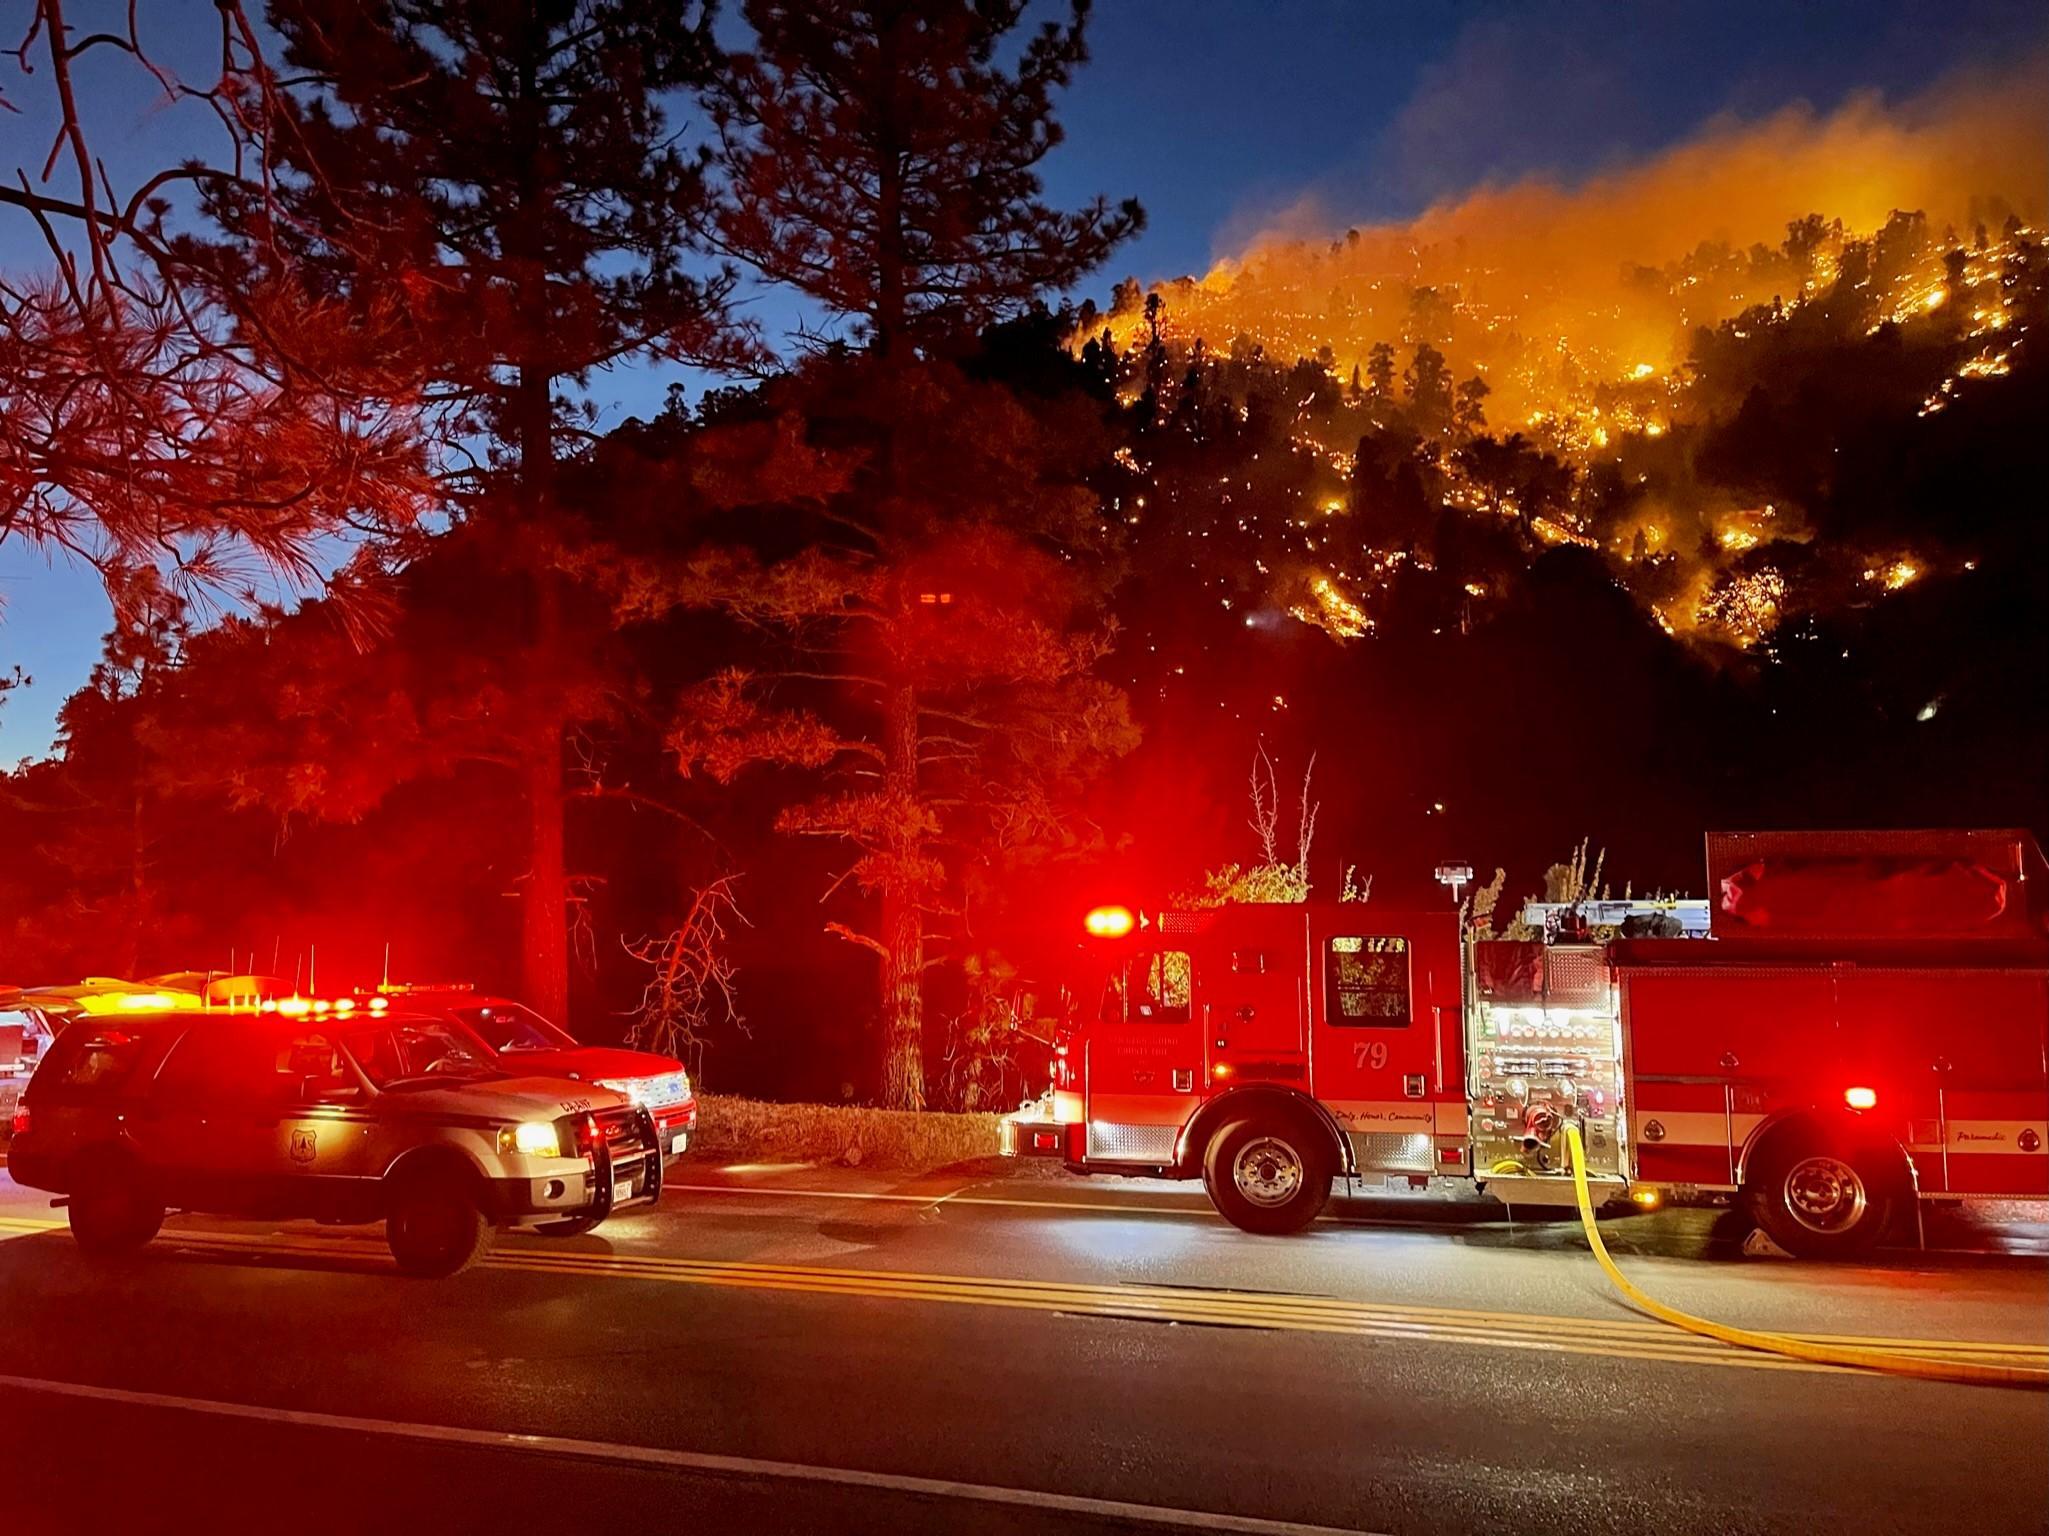 Initial attack operations from Hwy. 2 at Wrightwood